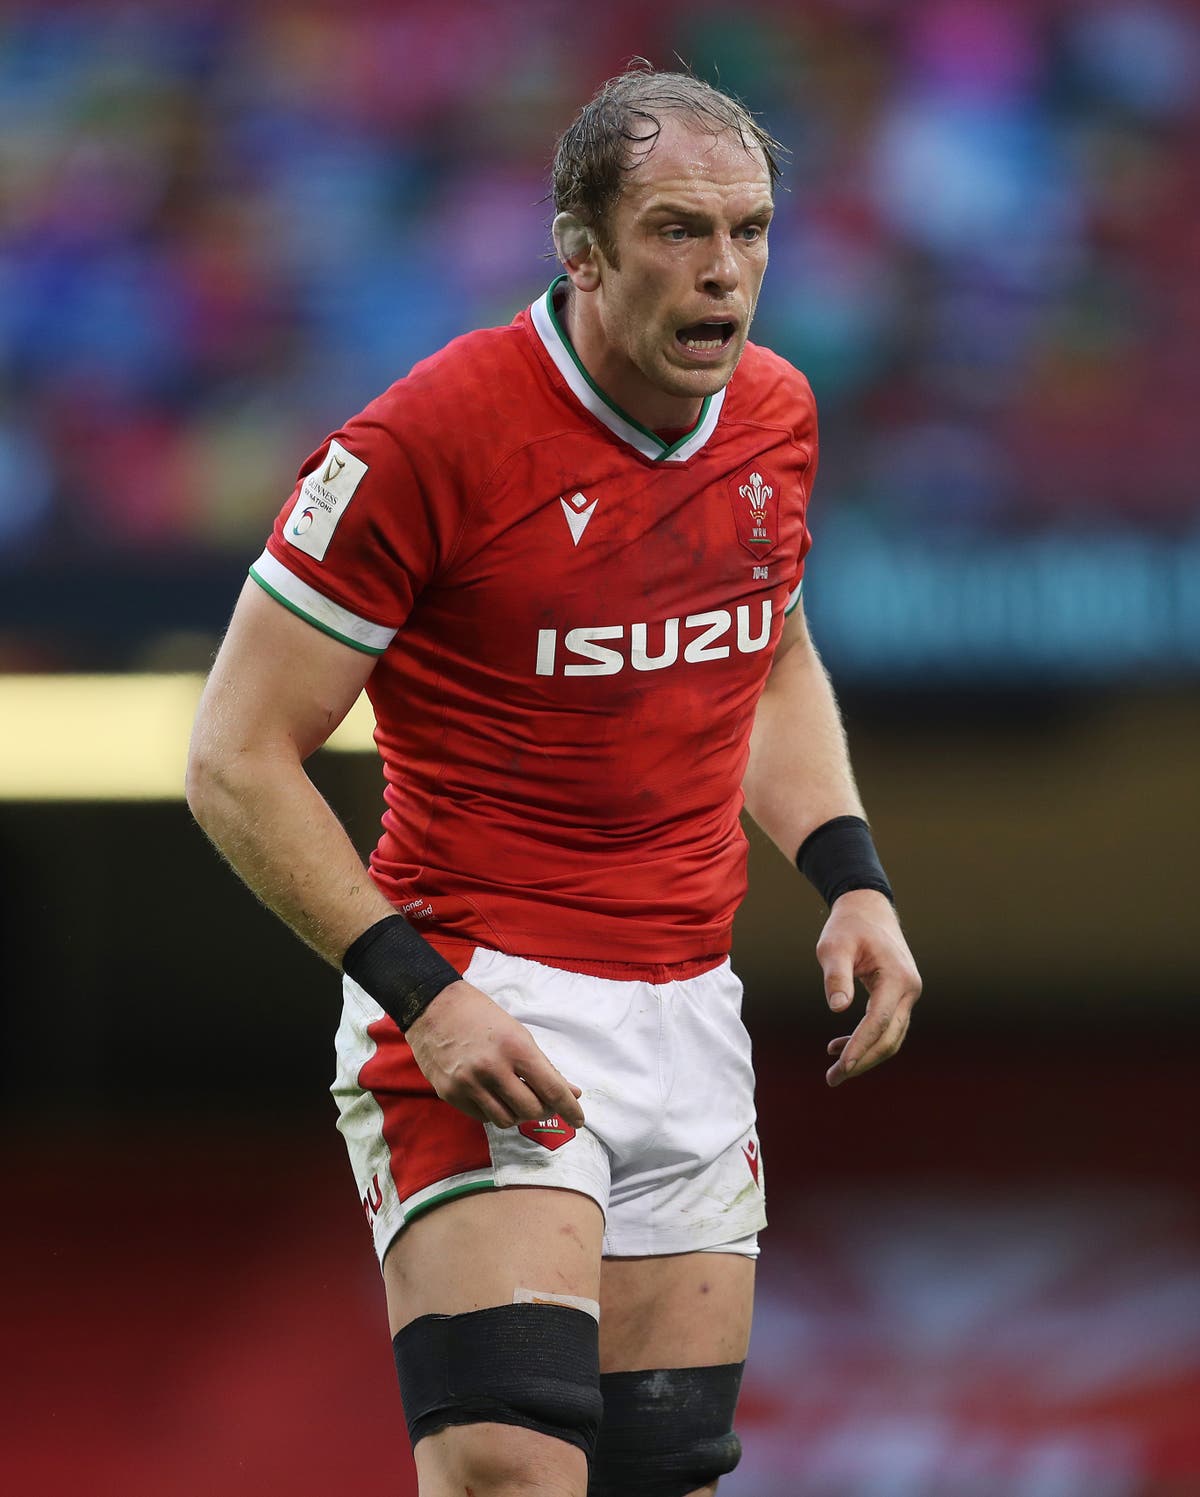 Alun Wyn Jones: Wales have opportunity to create history against New Zealand